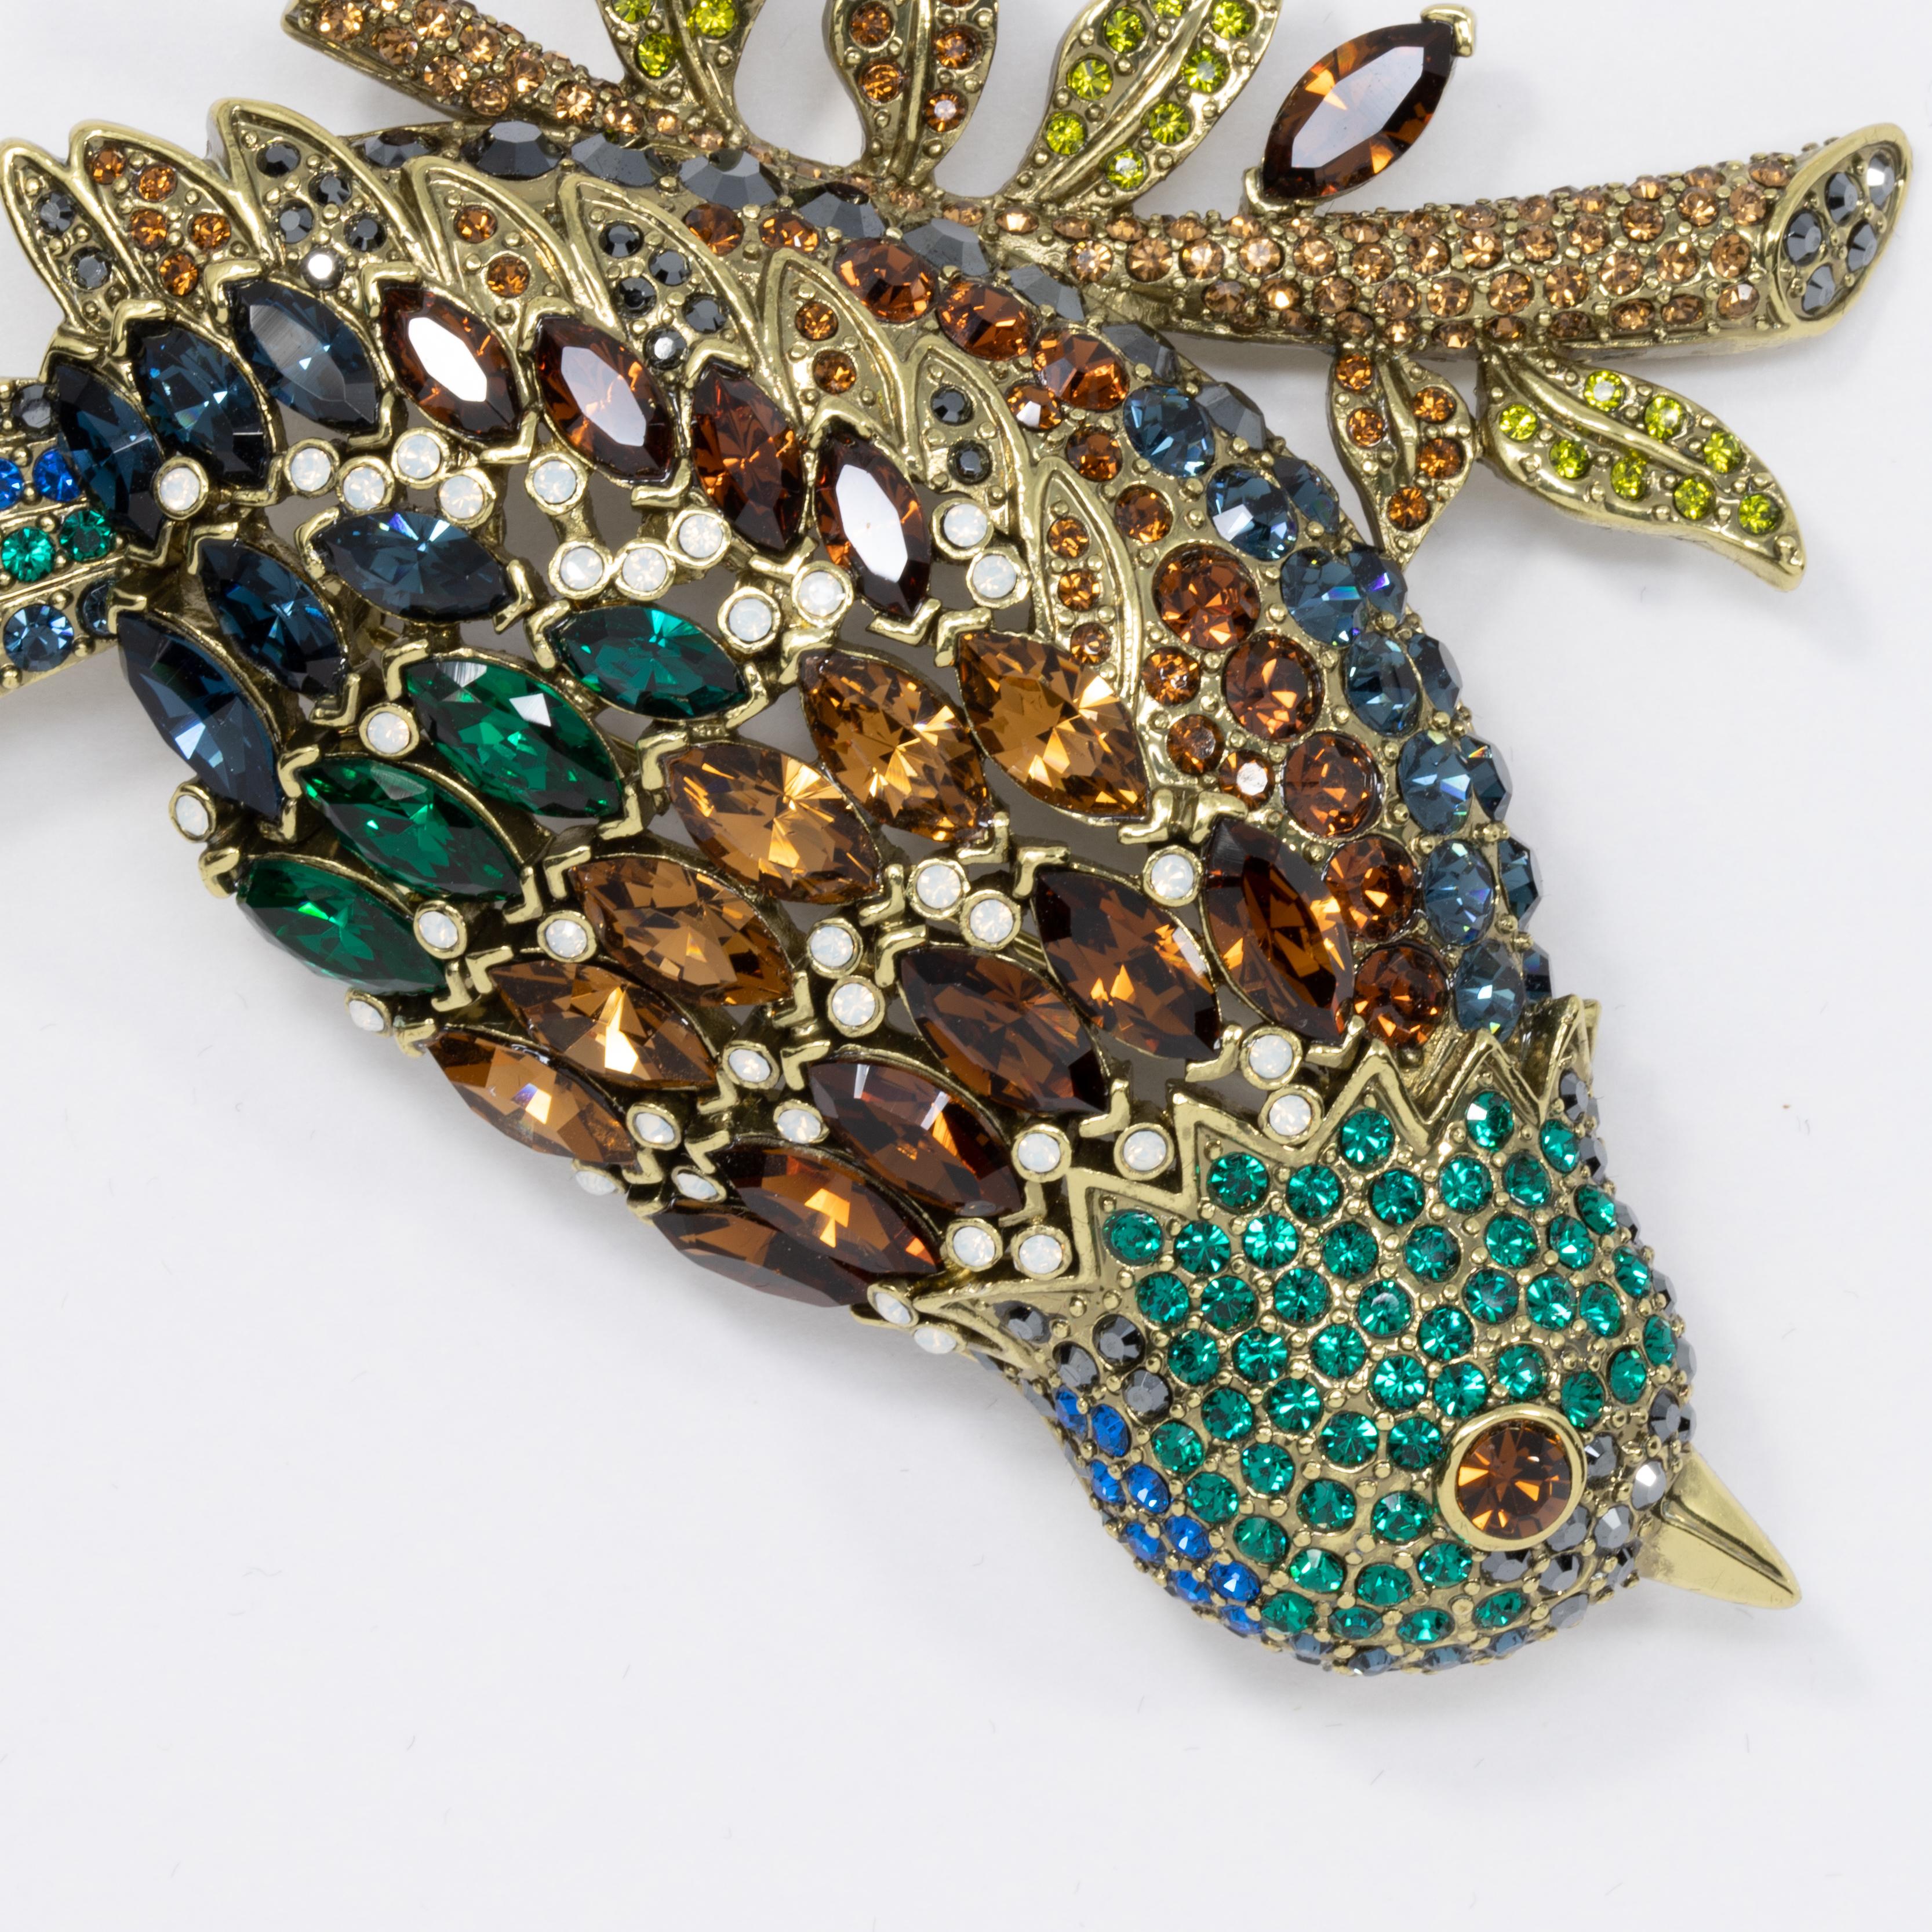 Take fashionable flight with this sparkling bird perched on a jewel-encrusted branch. Pin brooch by Heidi Daus.

Amber, emerald, smoky topaz, and olive crystals

Limited-time, retired collection.

Hallmarks: Heidi Daus, CN